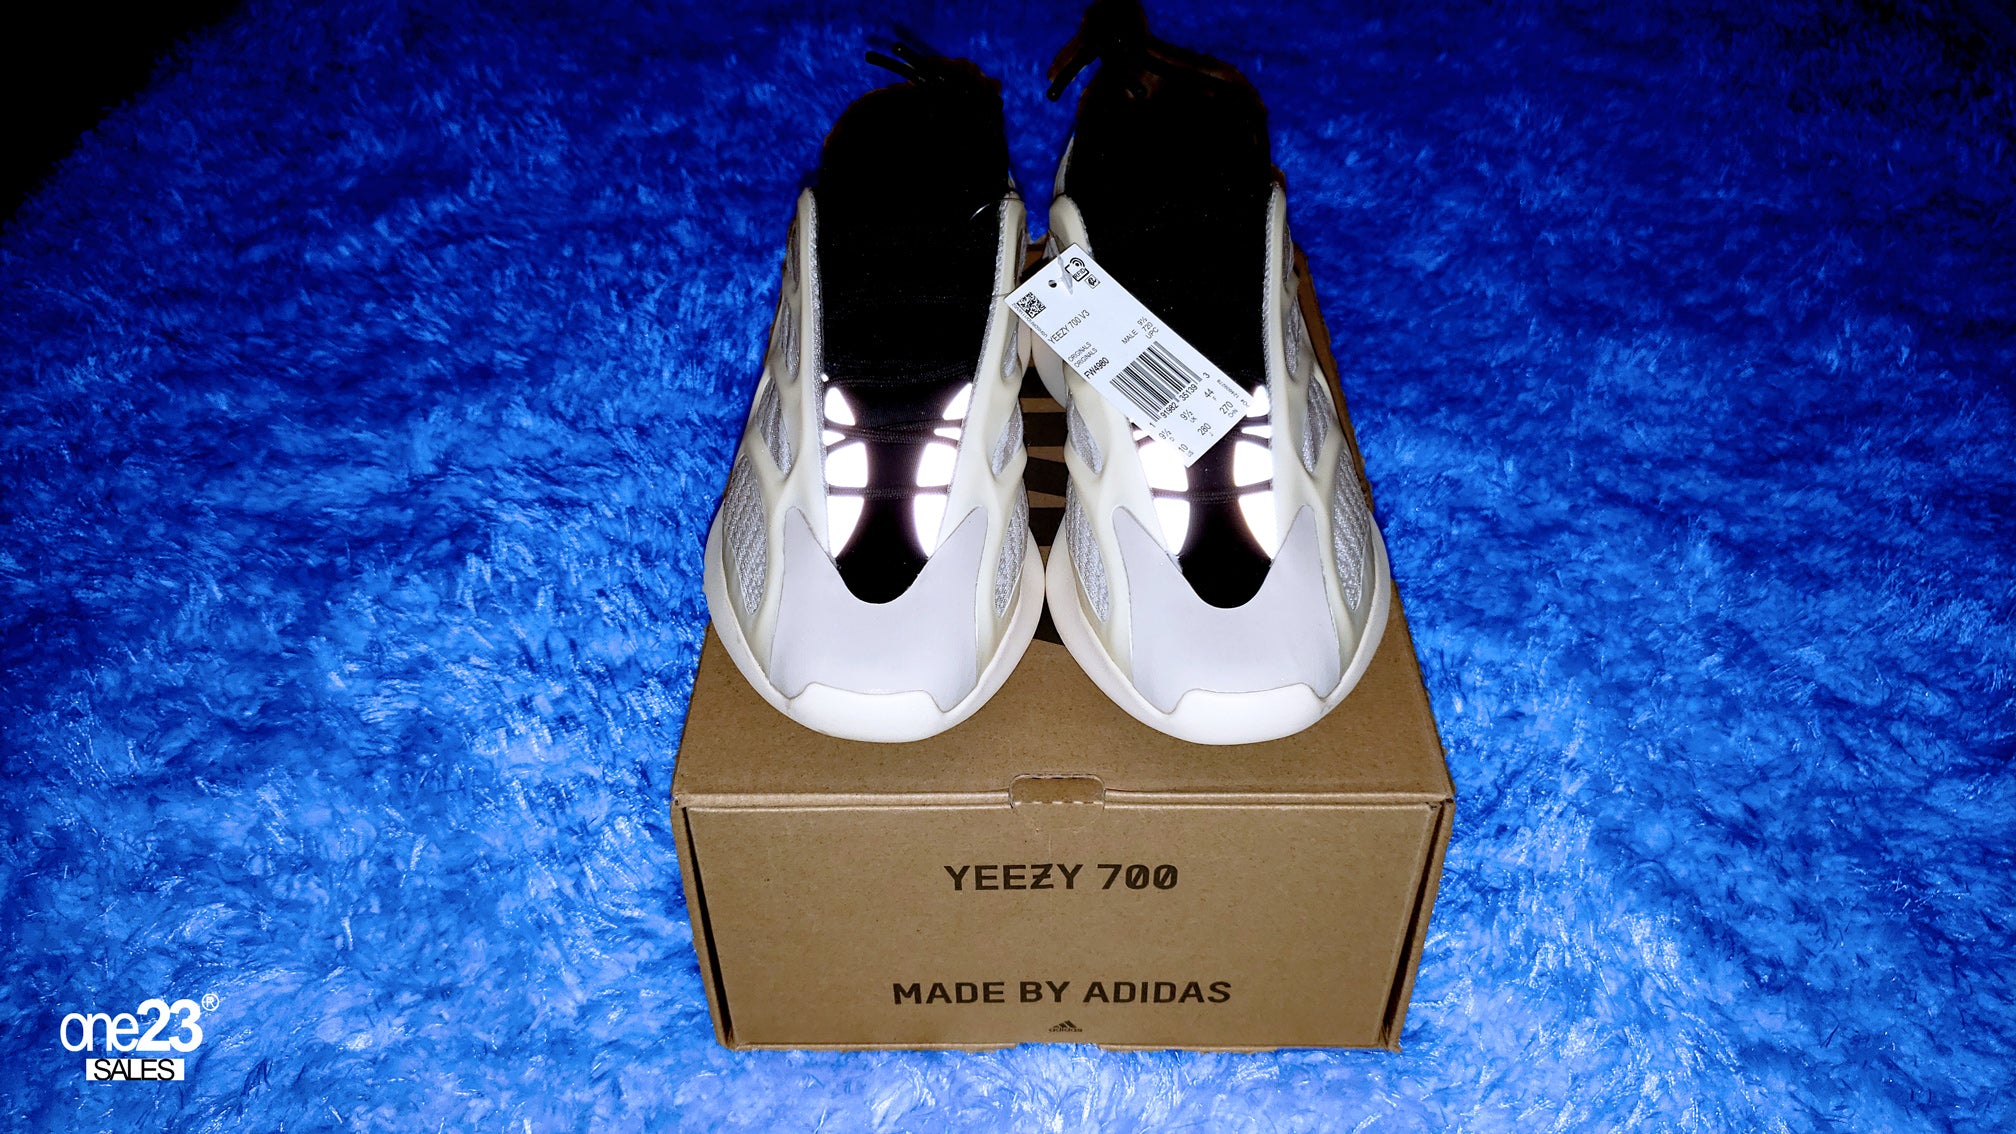 yeezy 700 box for sale